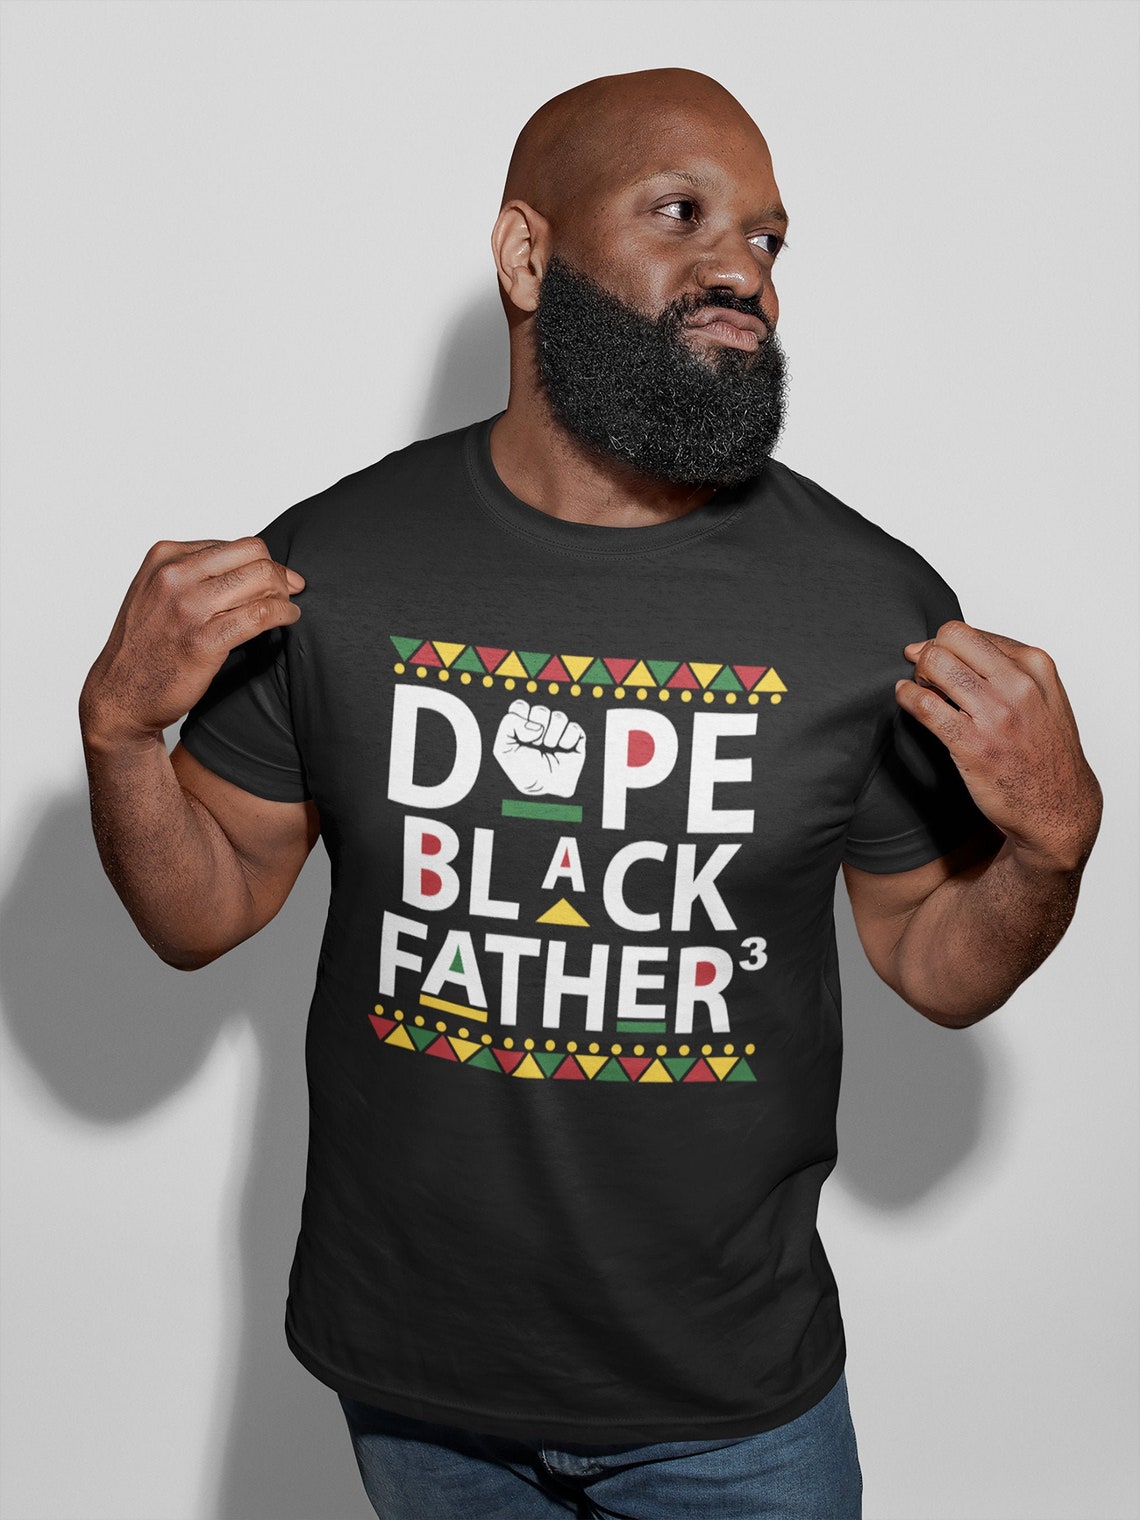 Dope Black Father Cubed , Black Owned